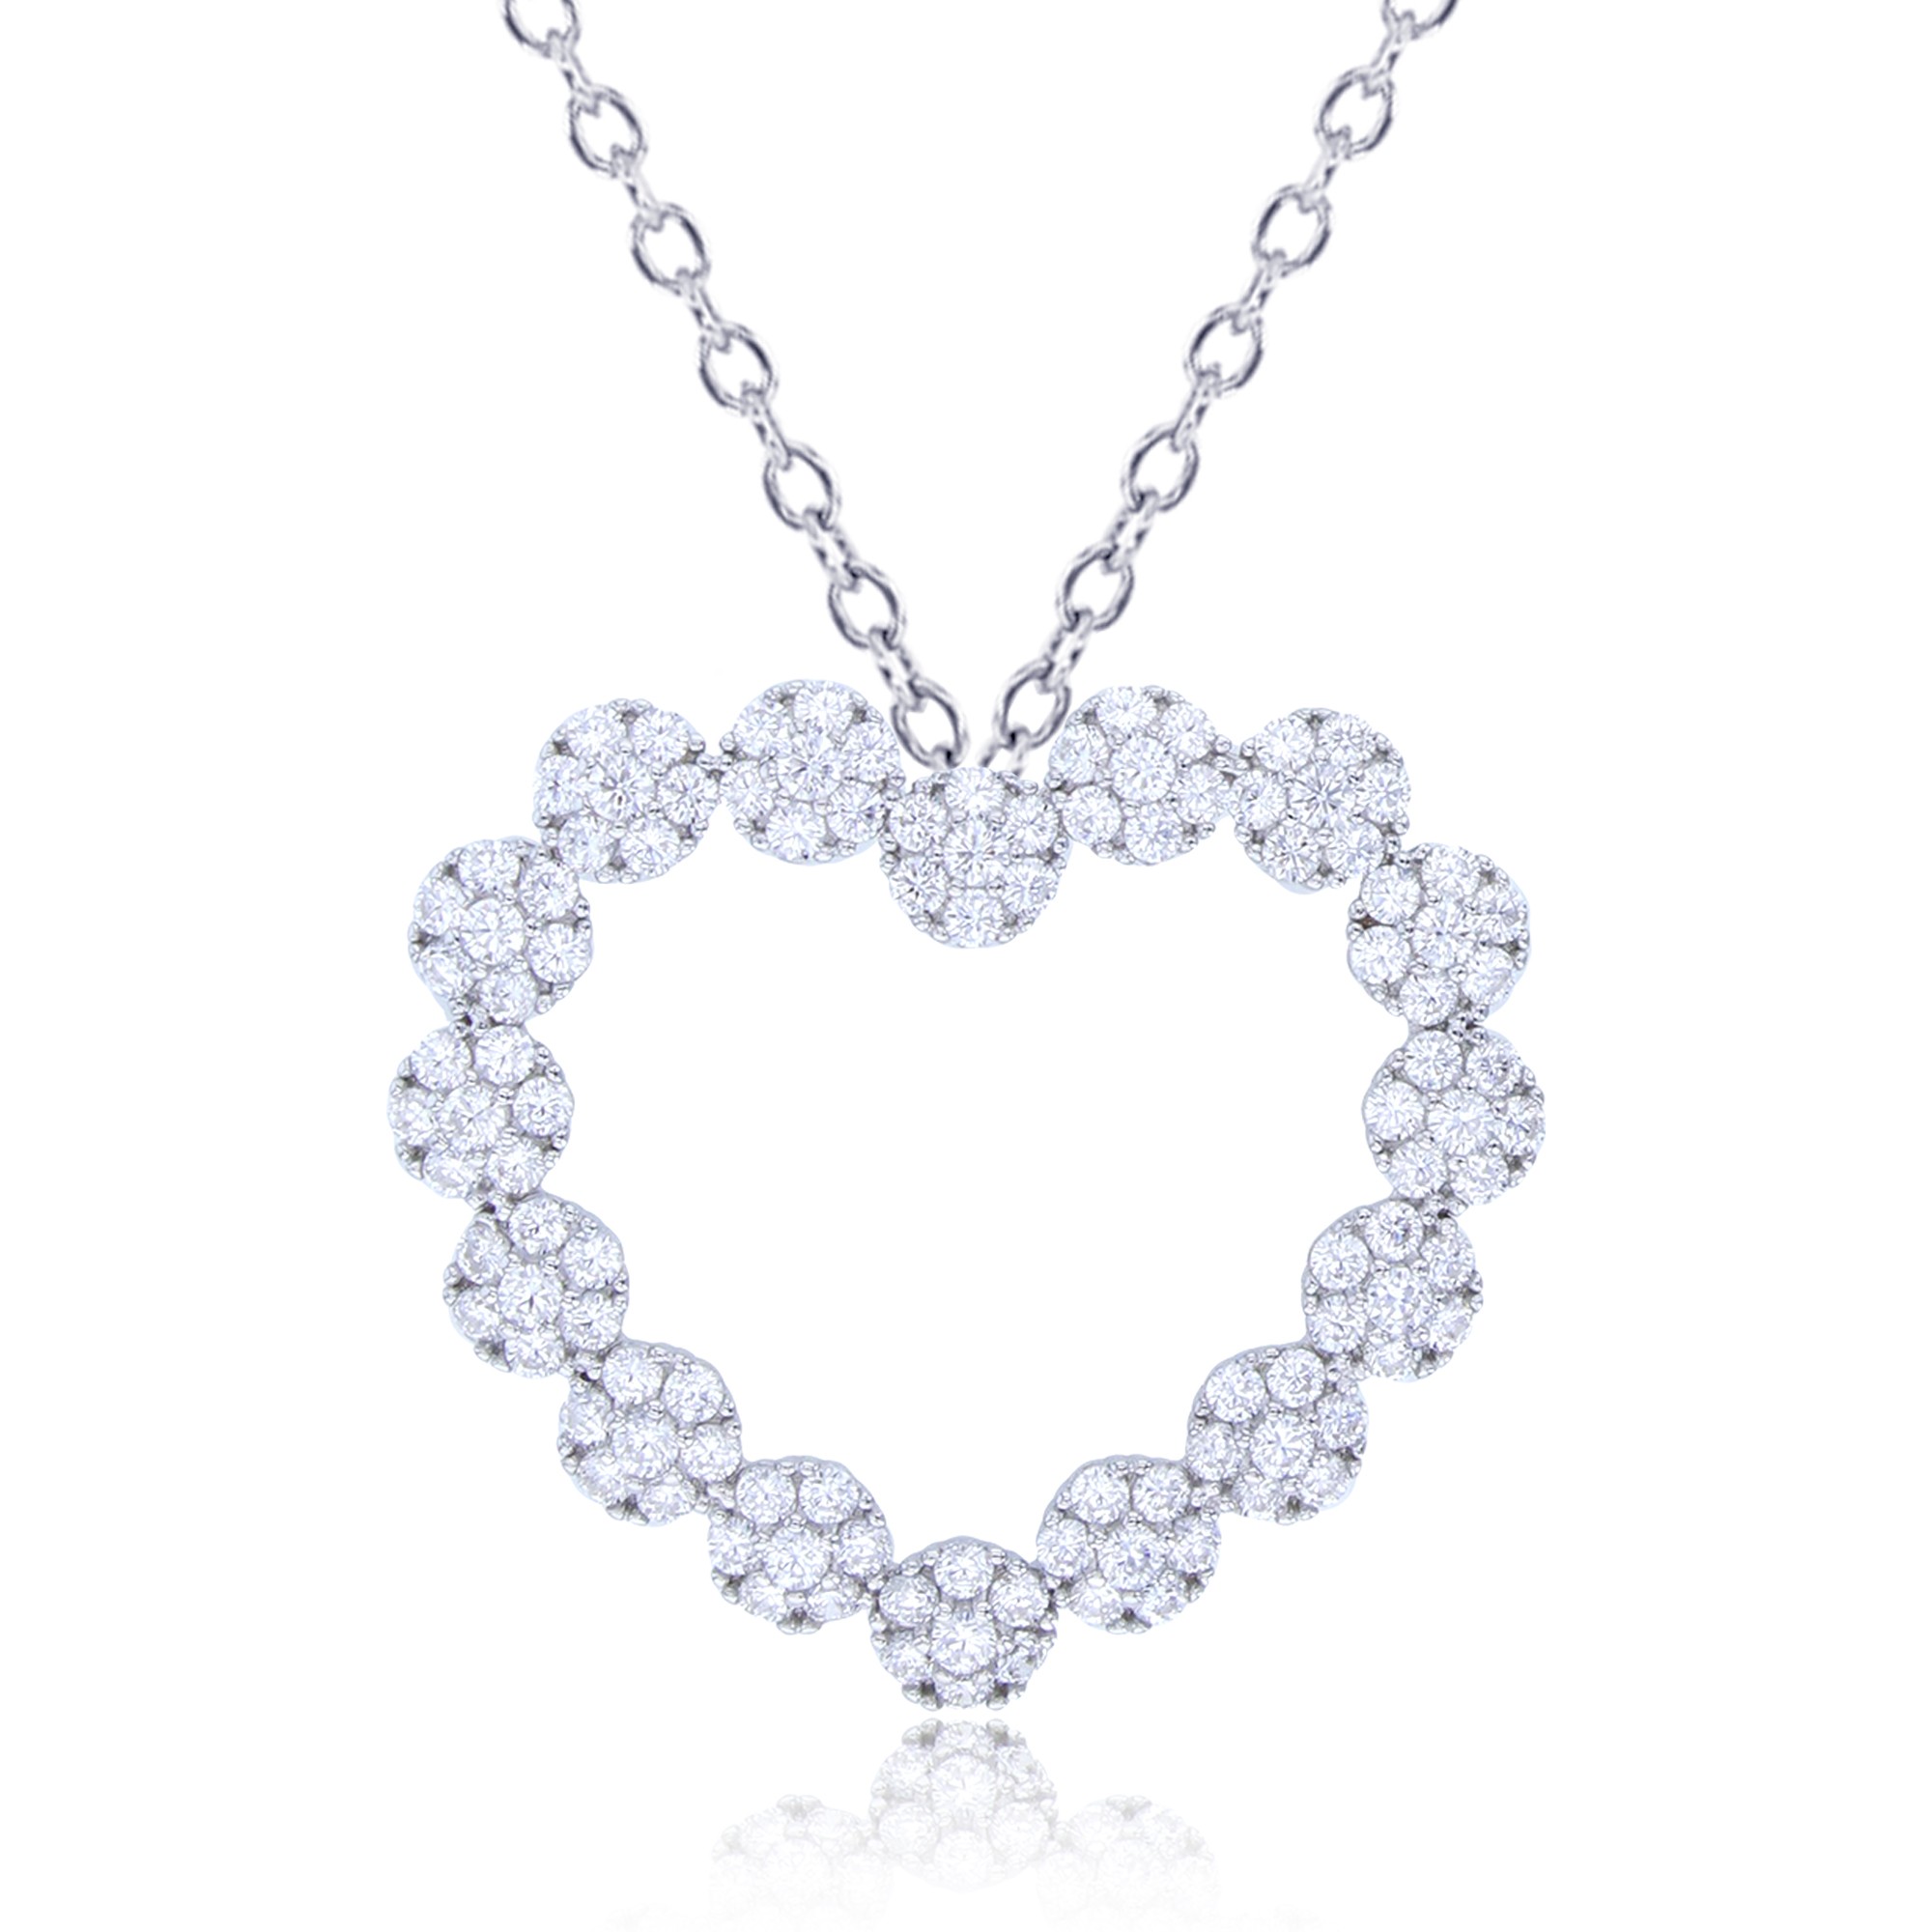 Sterling Silver Rhodium Plated Flower Heart Necklace With Cubic Zirconia 18" Medium Size